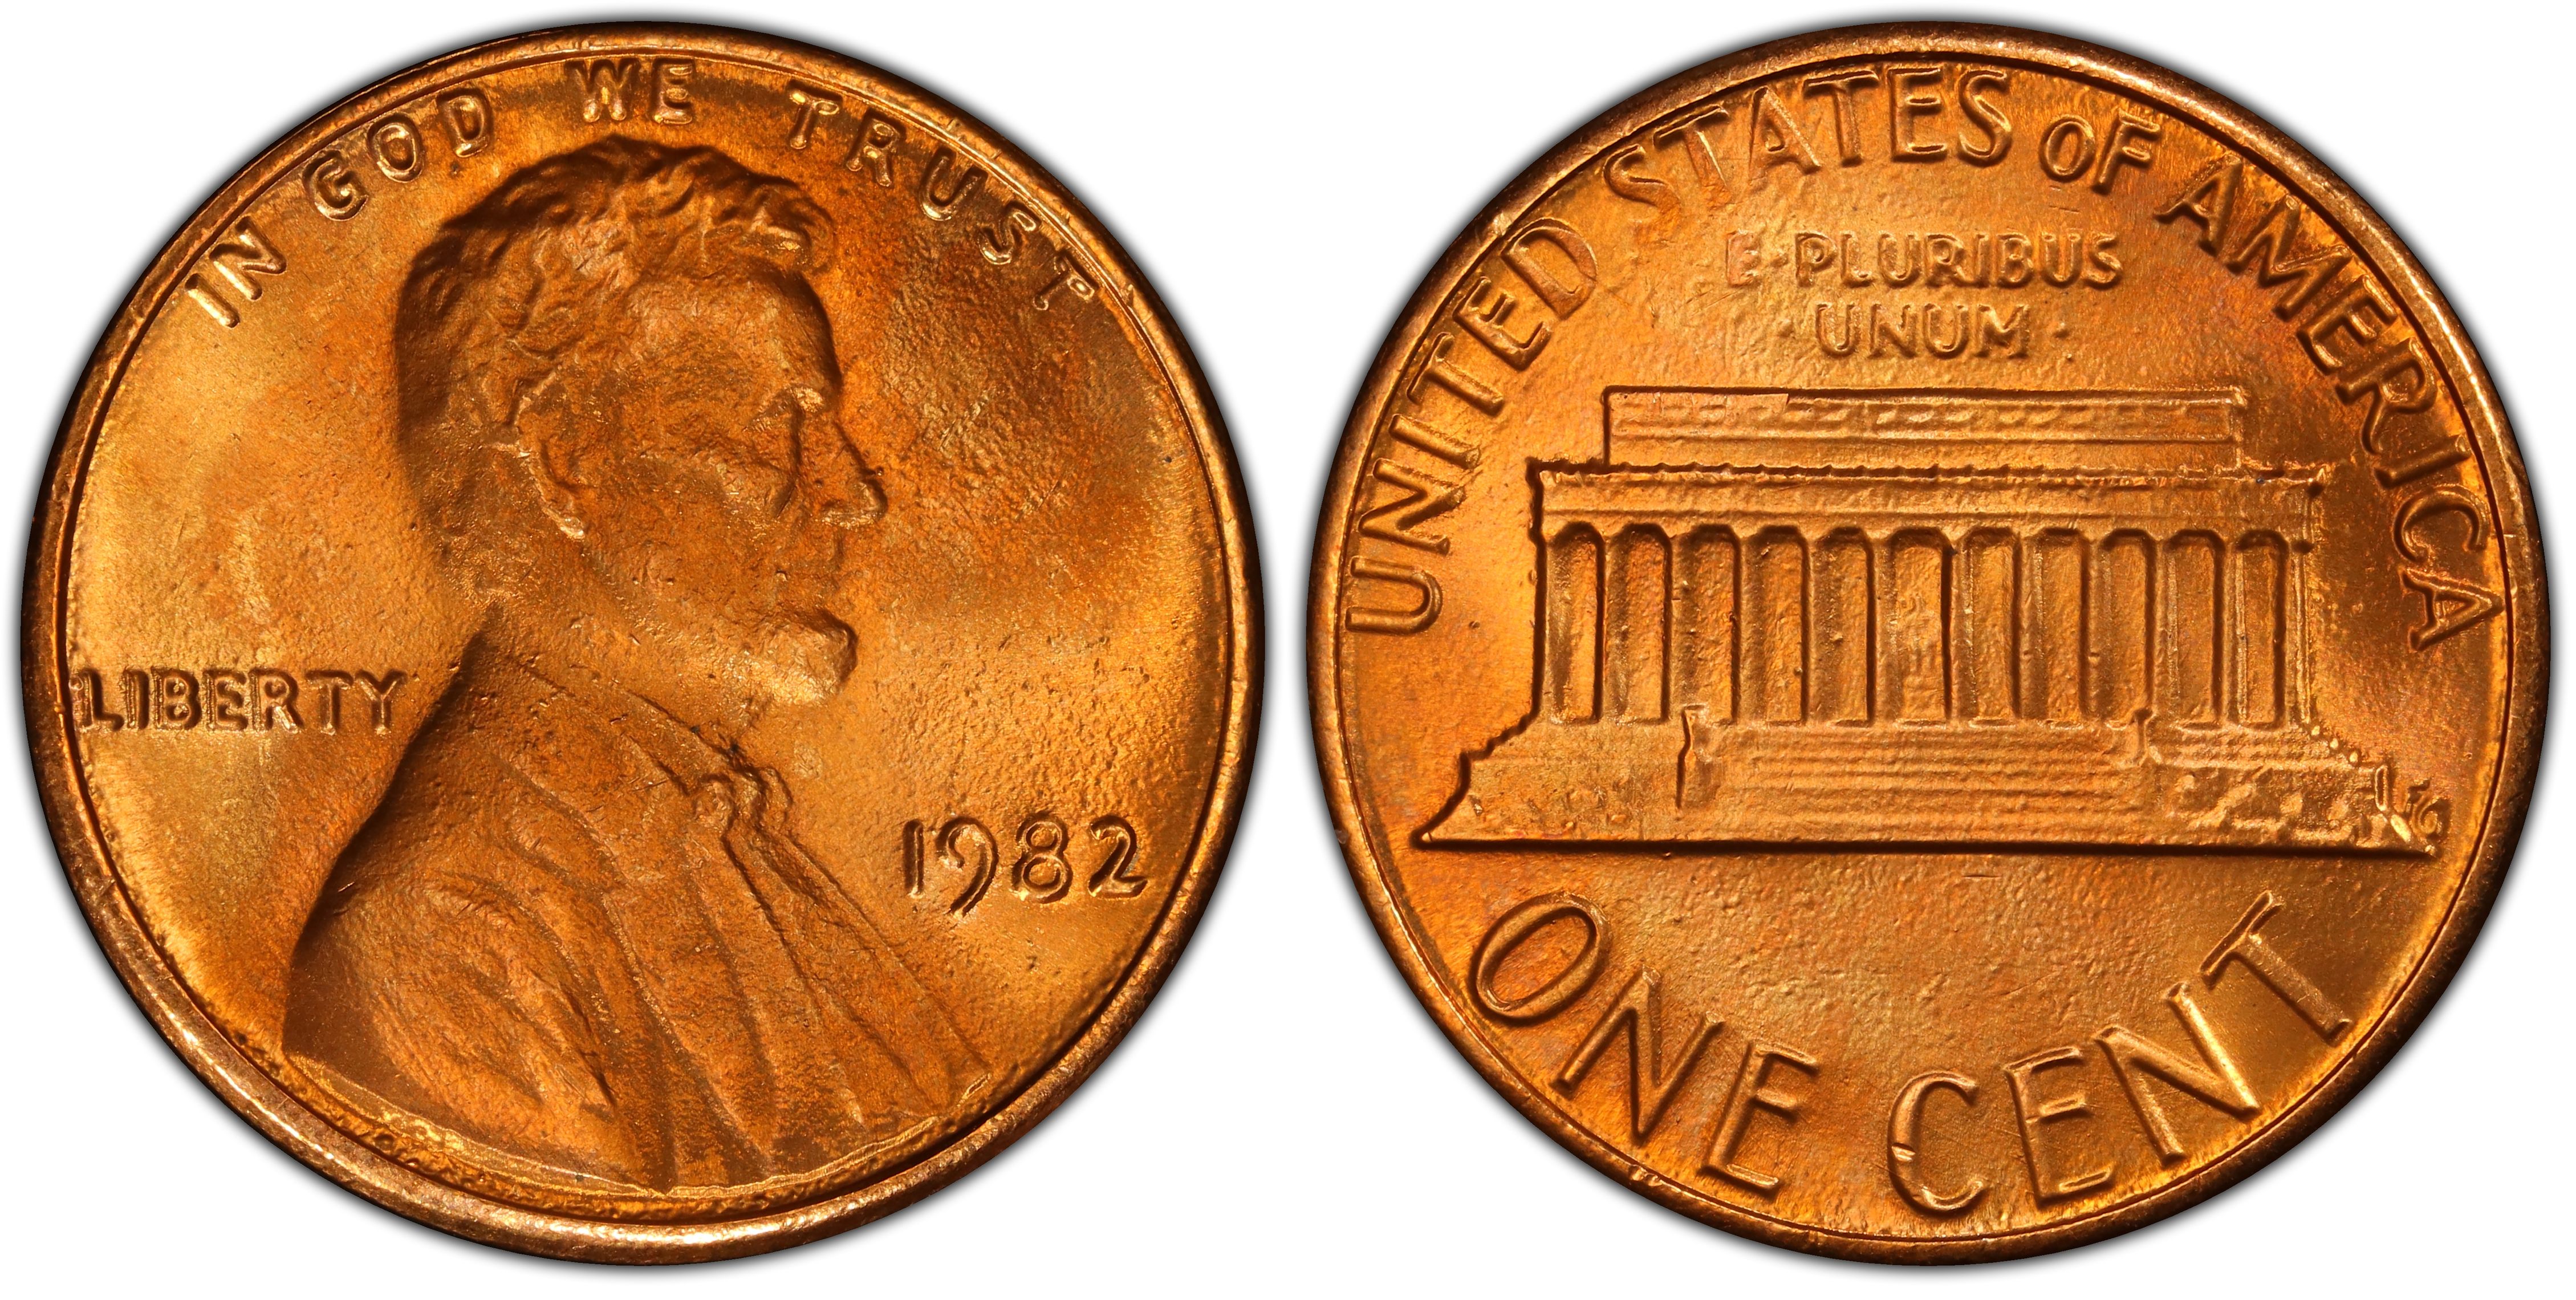 1982 large date Lincoln cent copper penny. Uncirculated in RED MS